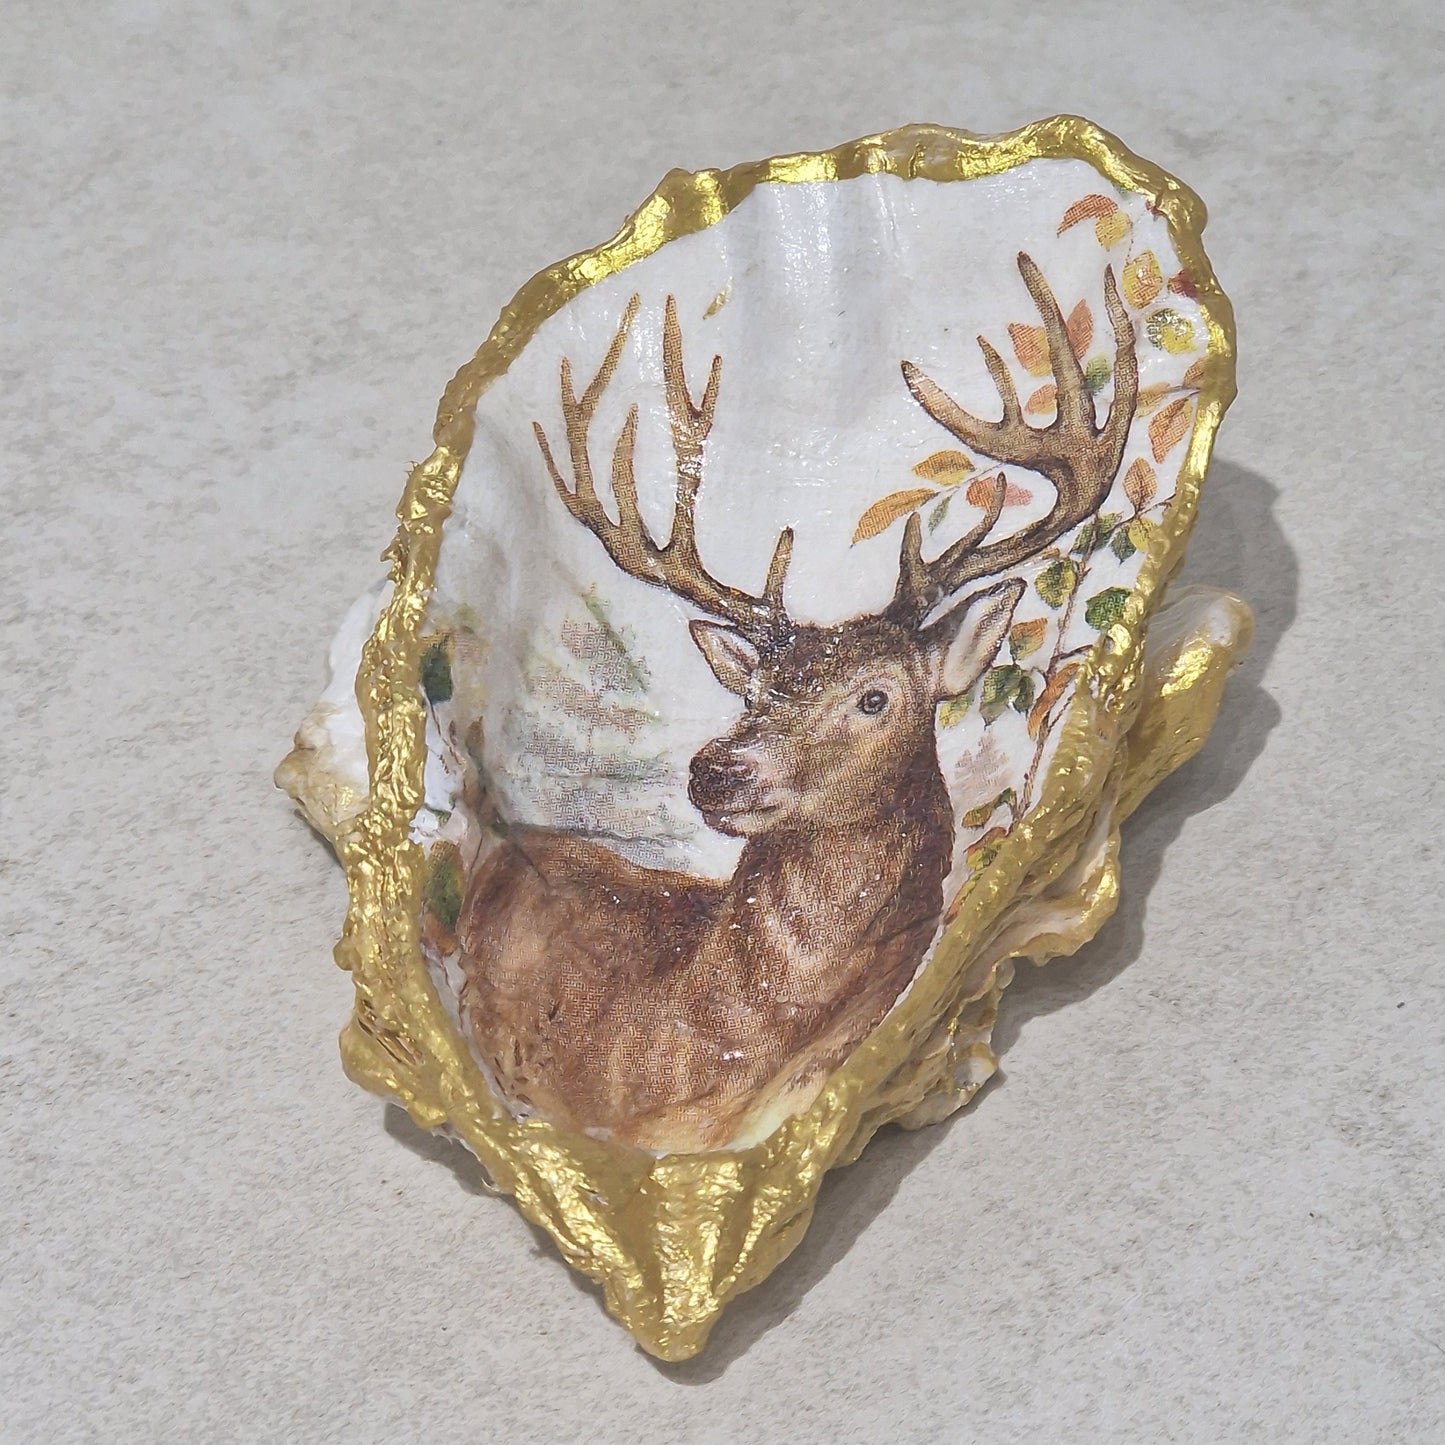 NEW Beautiful Stag Oyster Shell Trinket Dish Jewellery Holder Gift